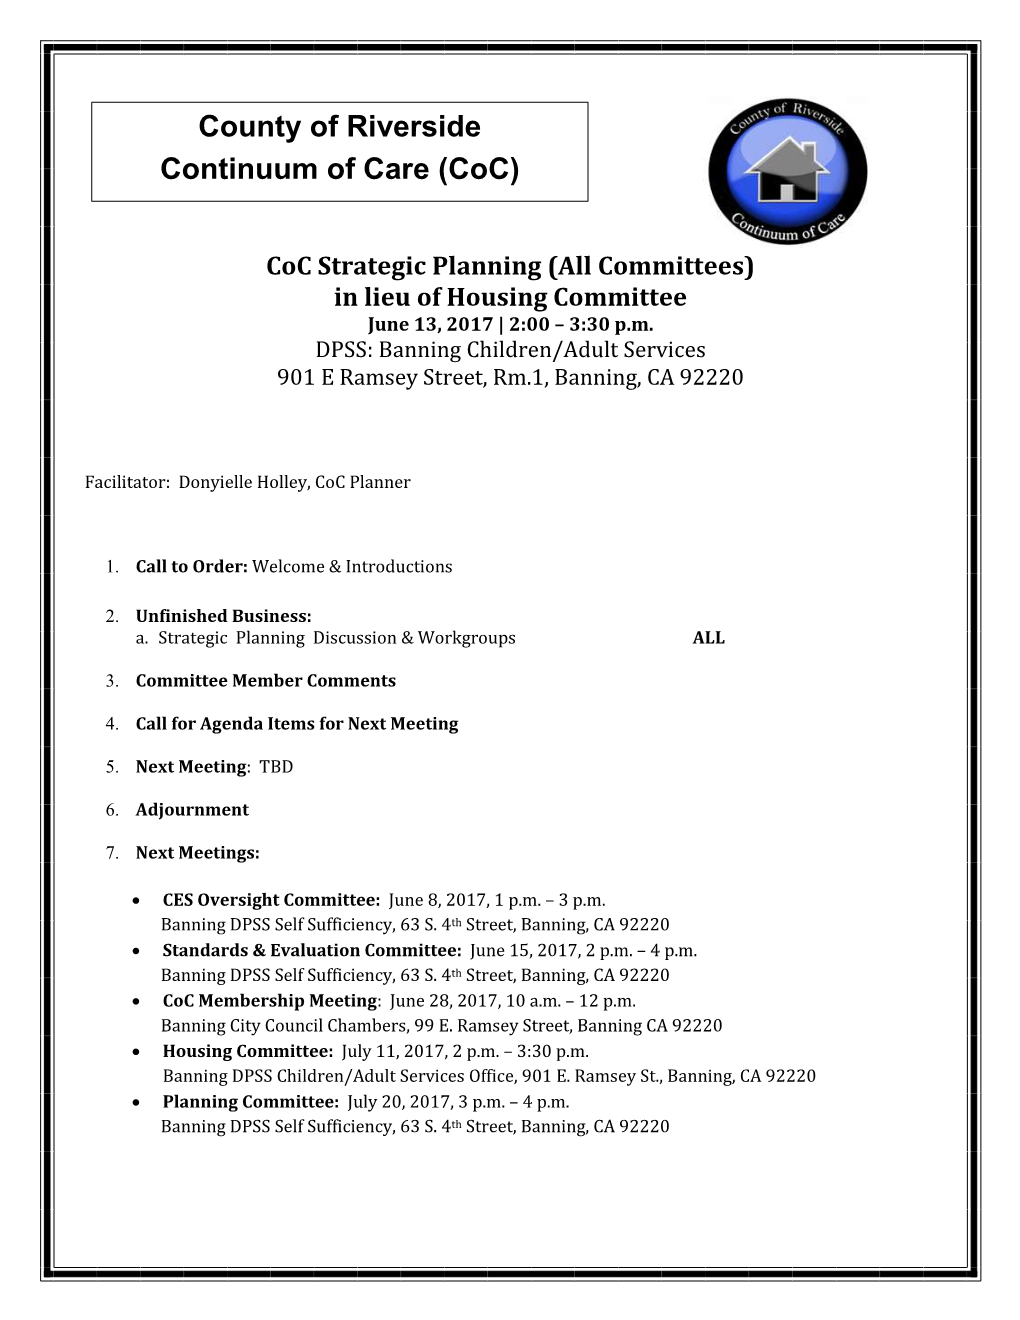 County of Riverside Continuum of Care (Coc)